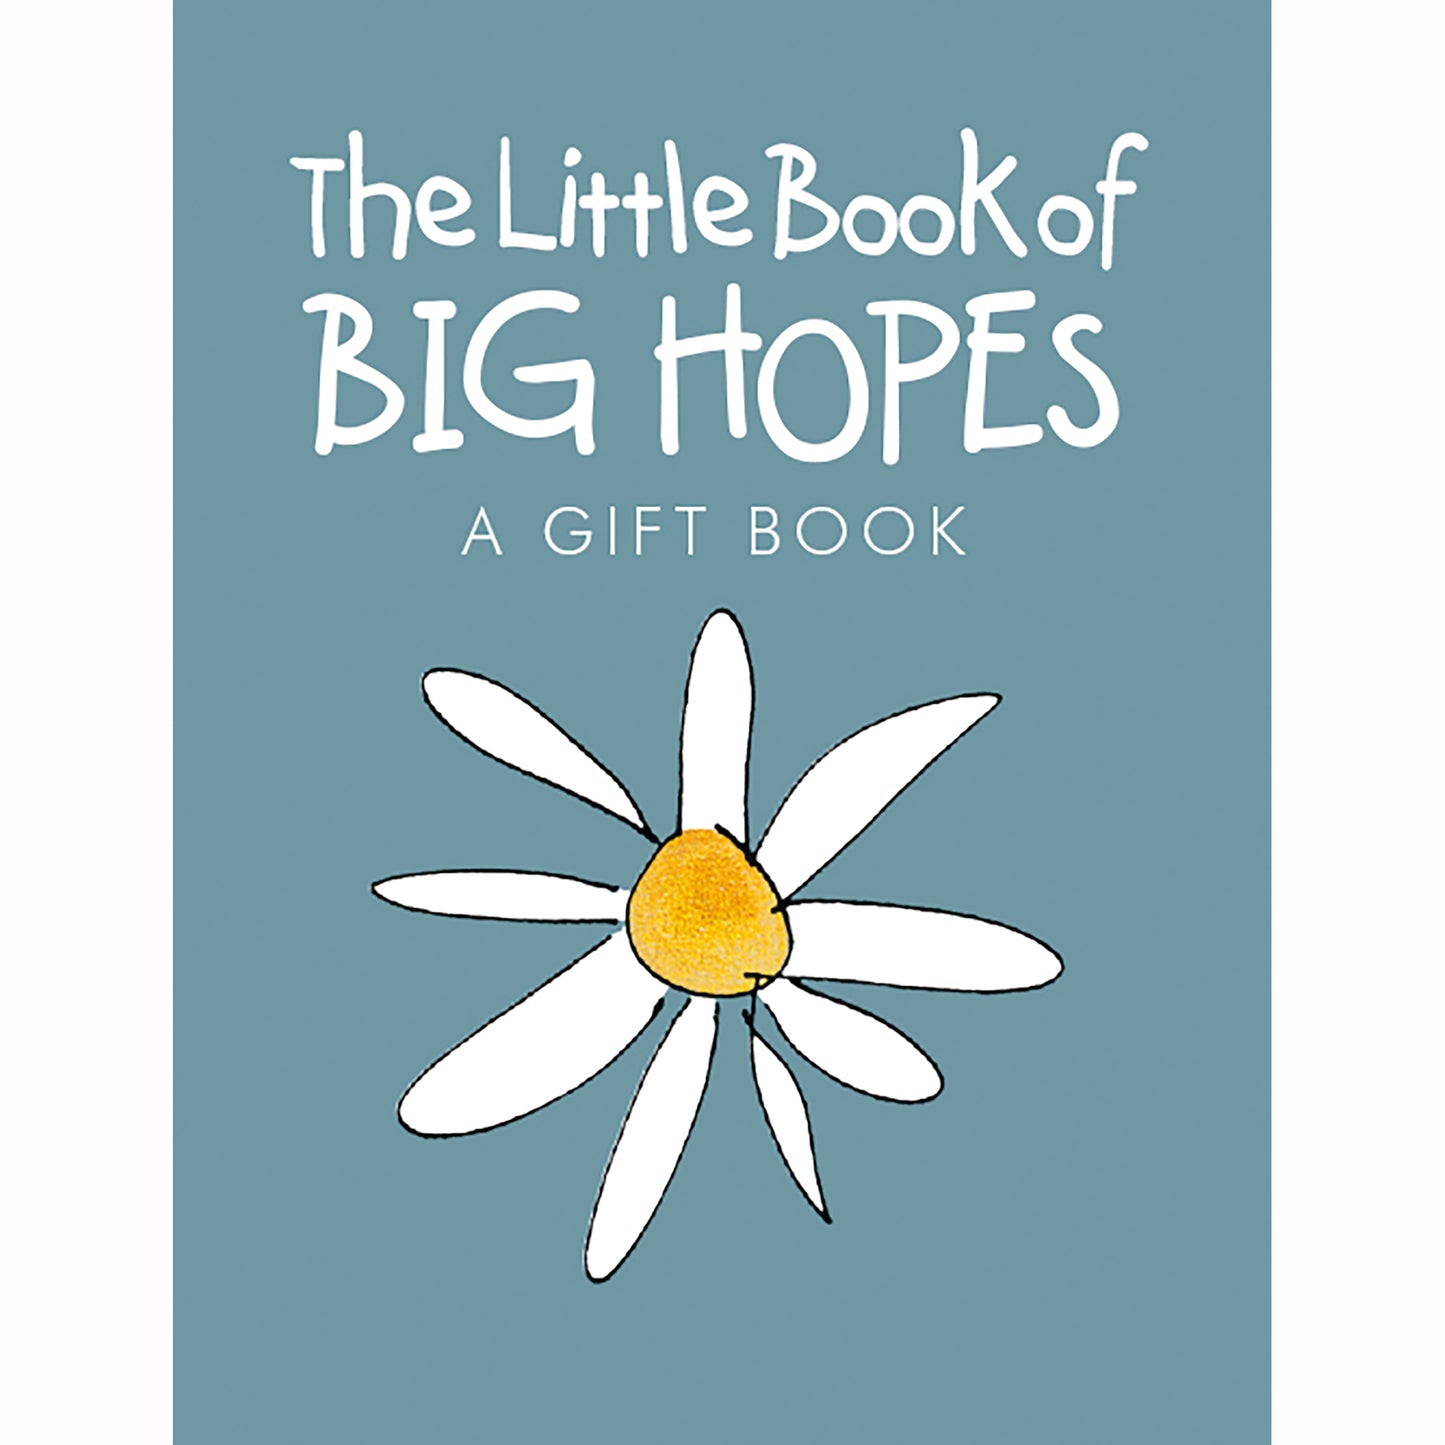 The Little Book of Big Hopes